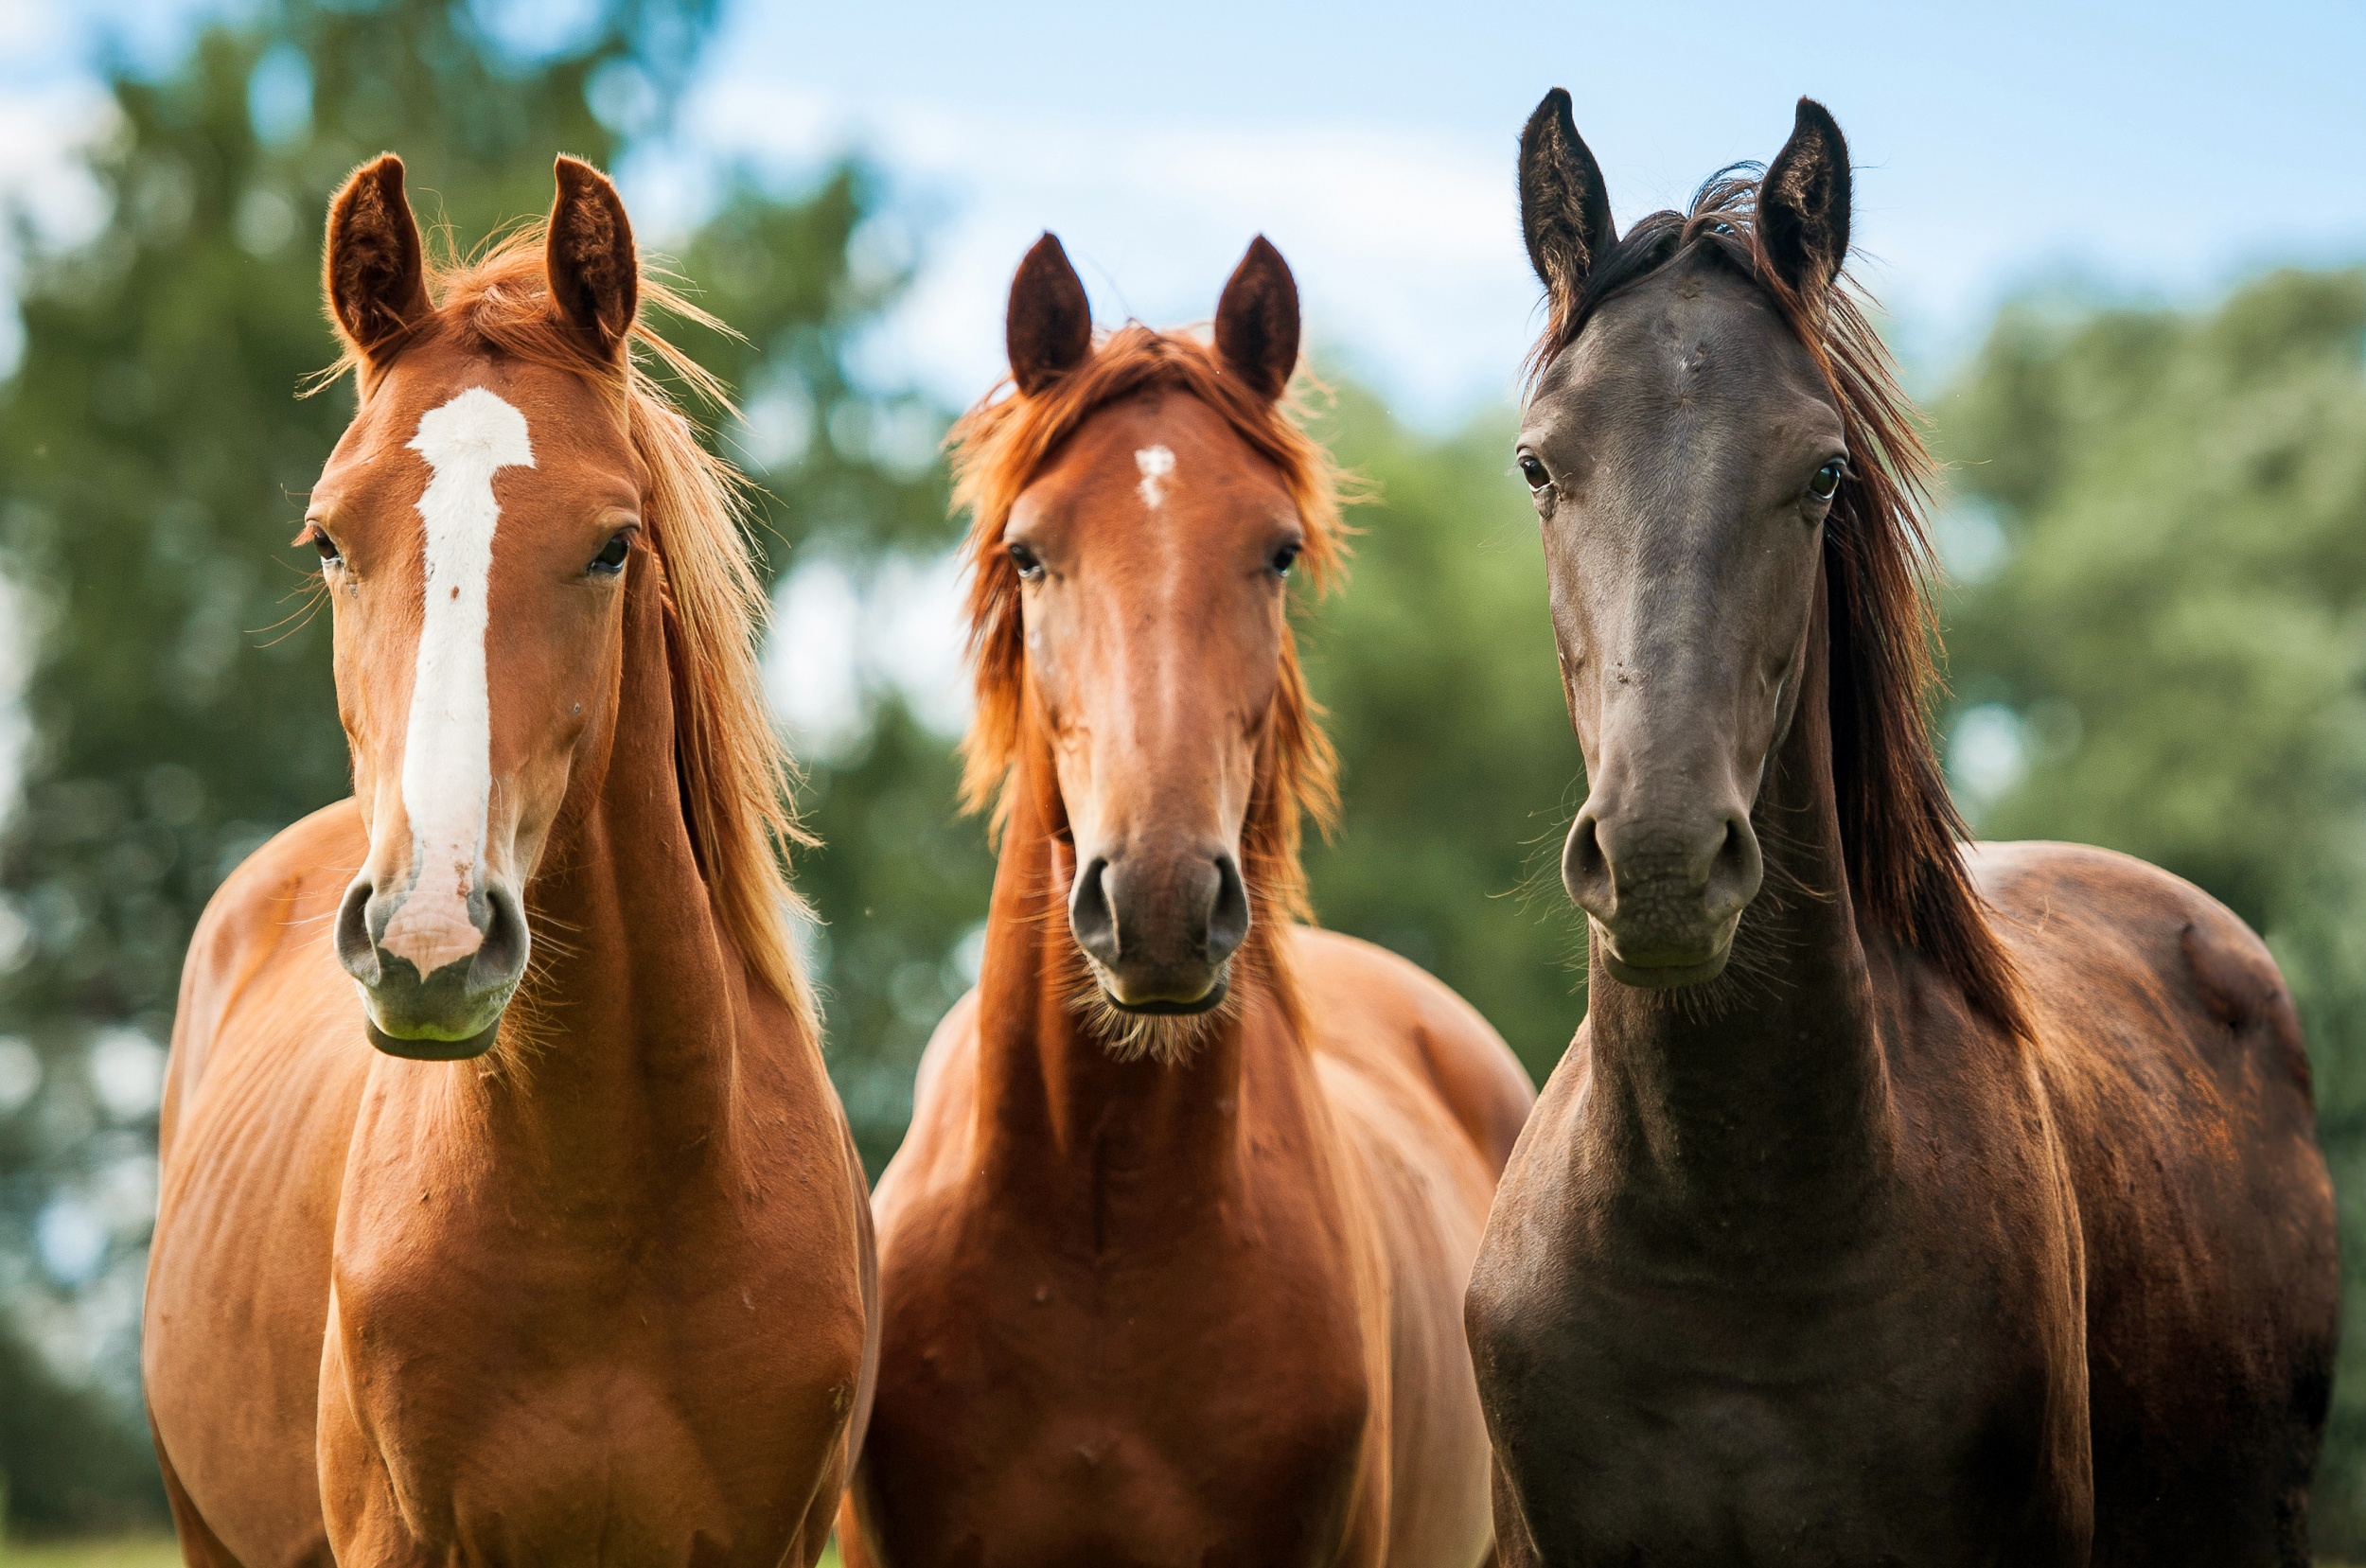 Three young horses, standing next to each other and looking directly at the camera
